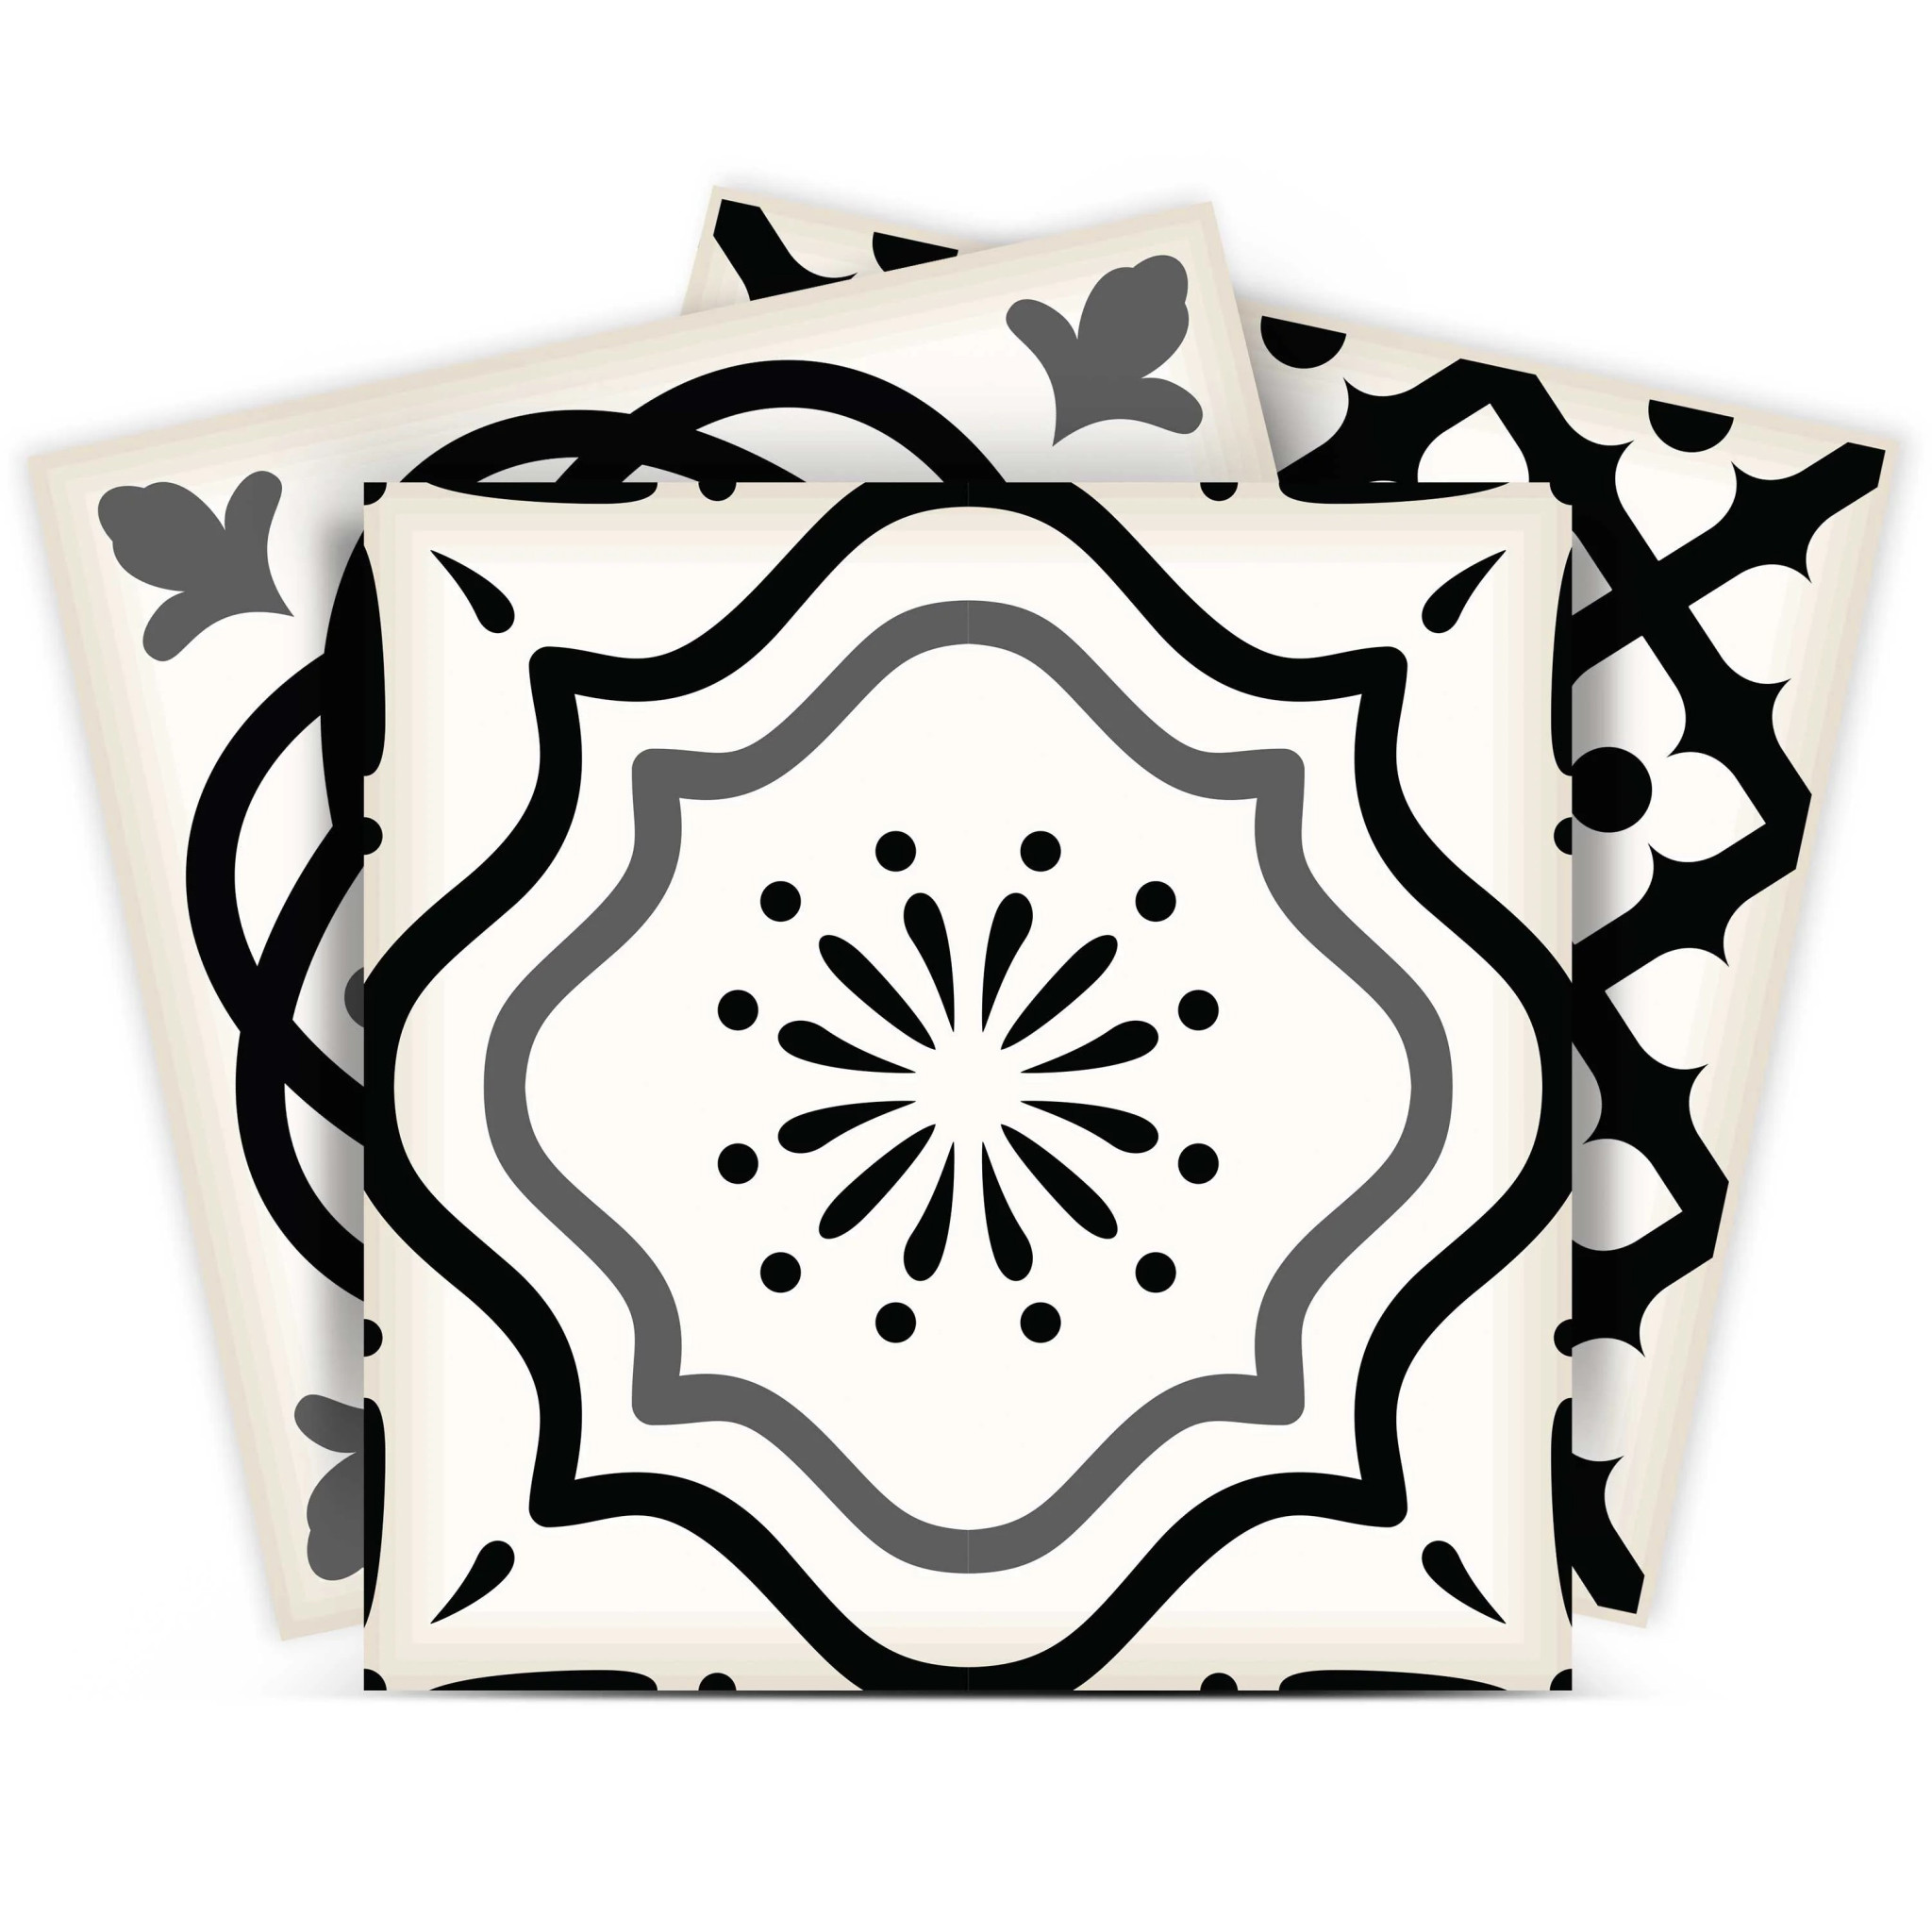 4" X 4" Black and White Multi Peel and Stick Removable Tiles-399860-1